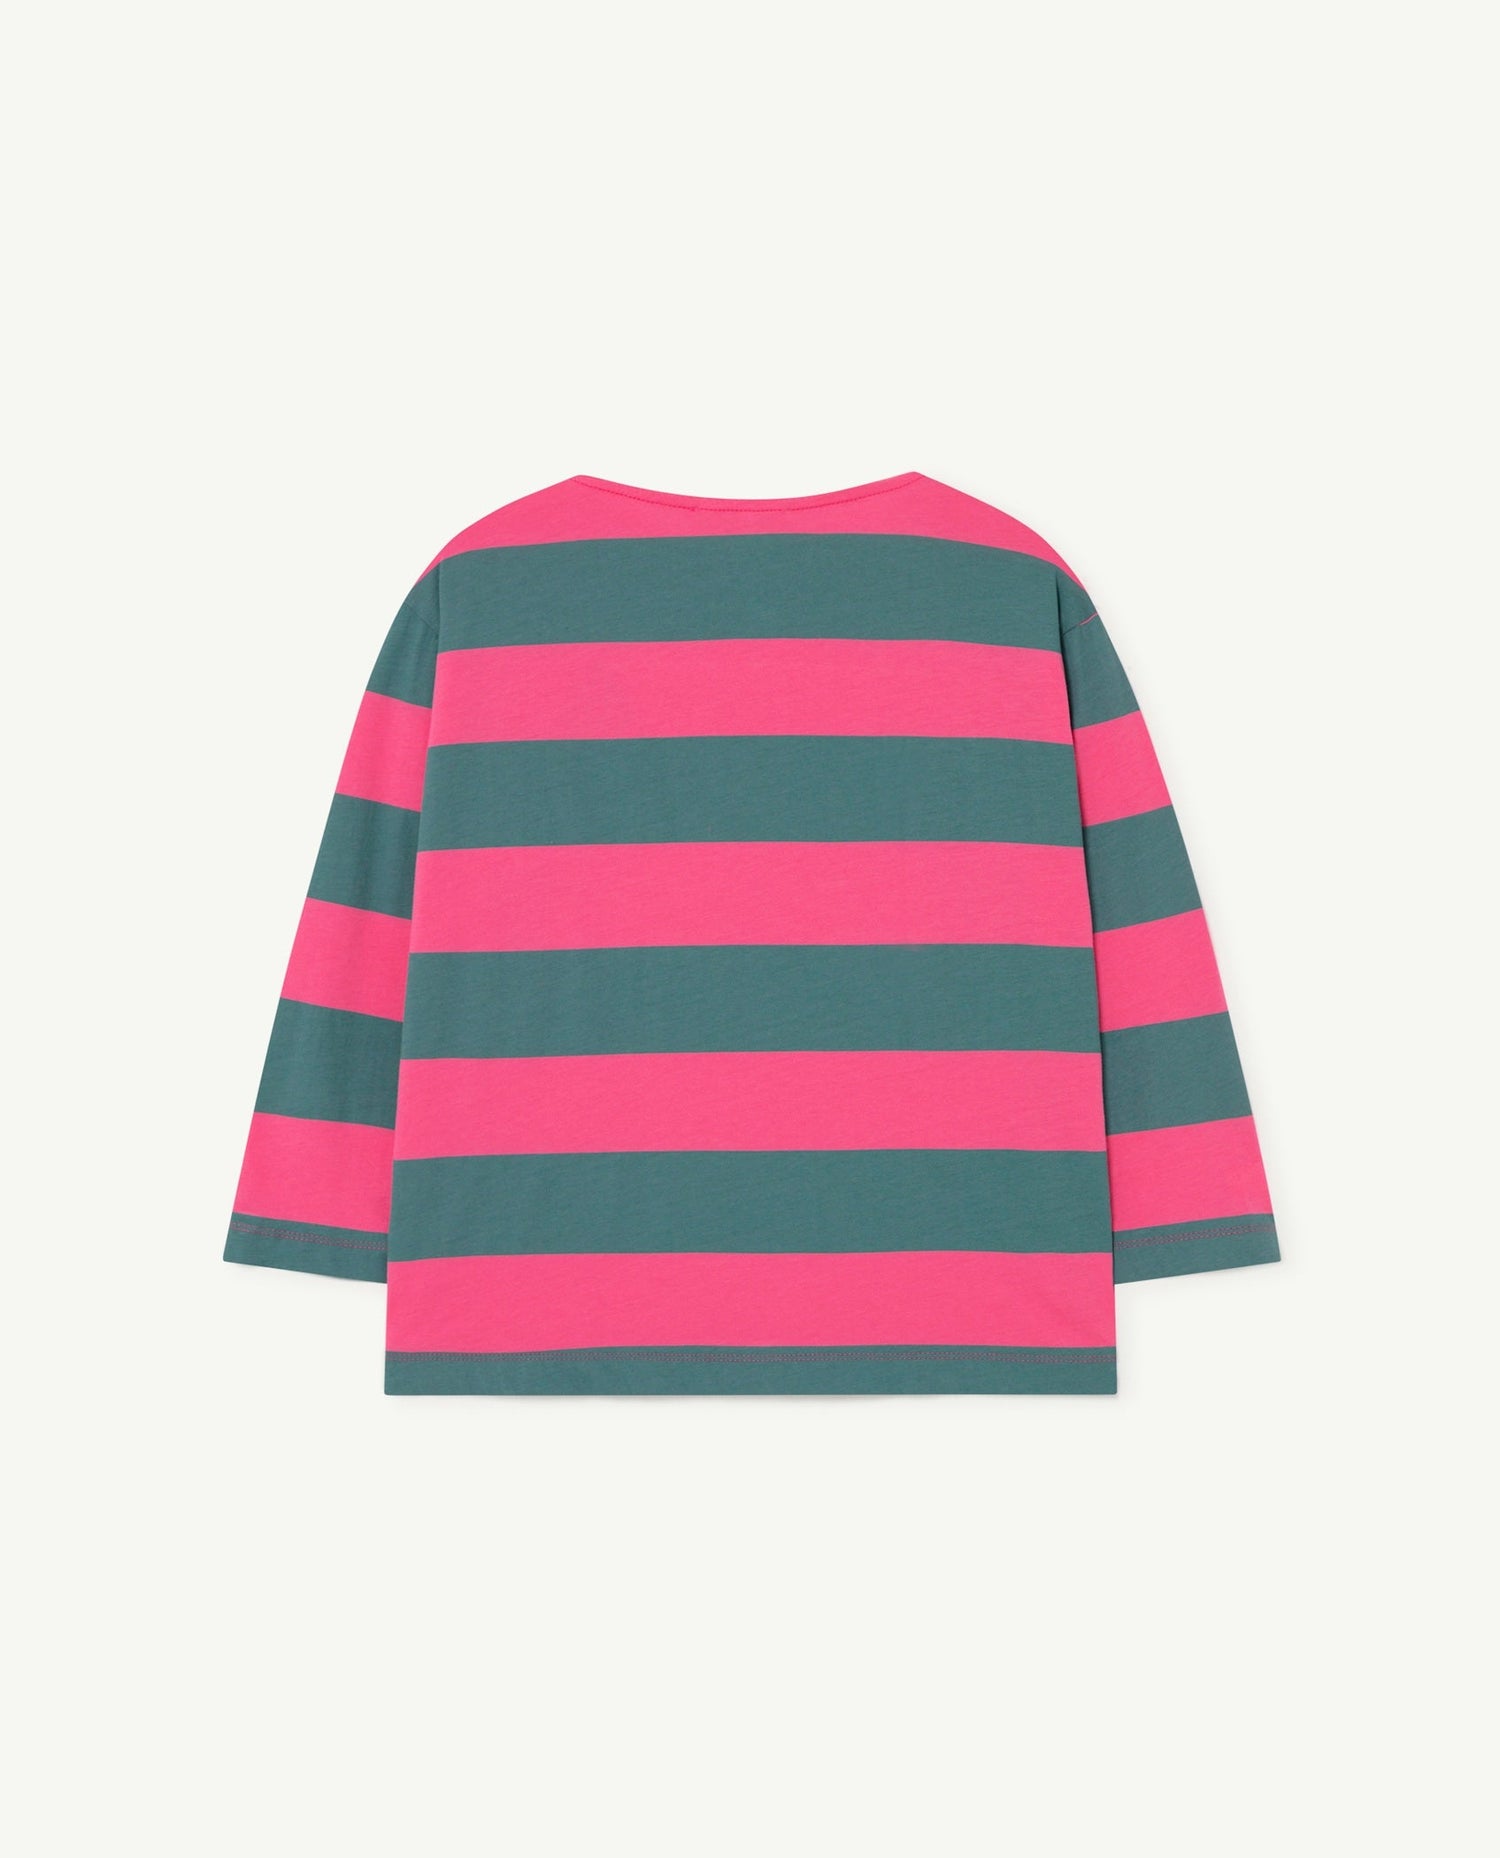 Anteater kids t-shirt pink Stripes Tops The Animals Observatory 